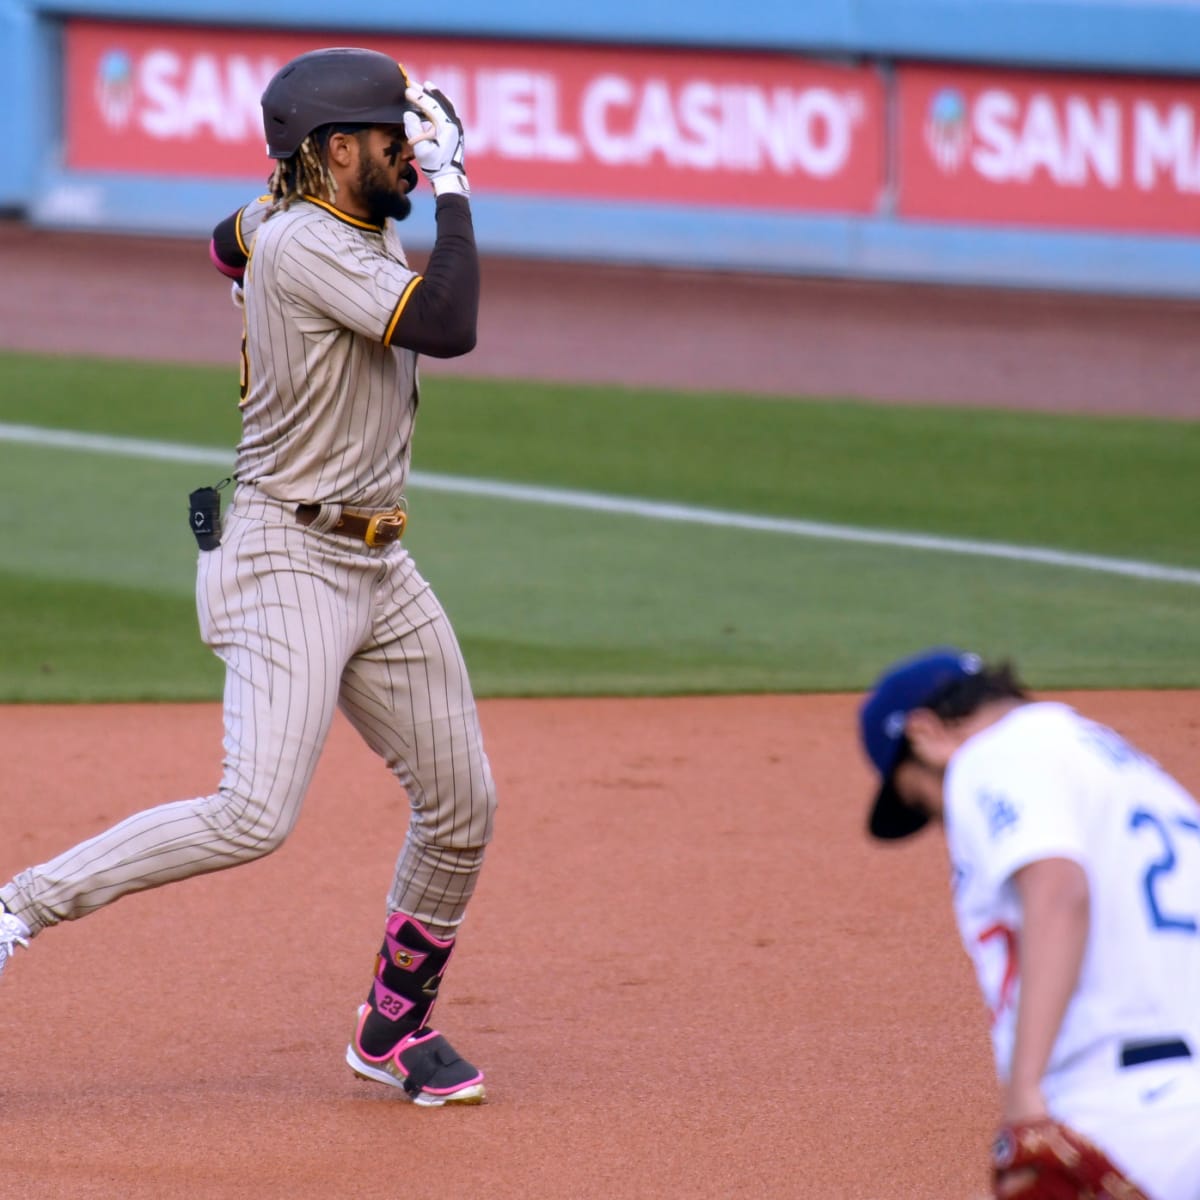 San Diego Padres' Fernando Tatis Jr. wears pink cleats as he stands on  first base after drawing a walk during the first inning of a baseball game  against the San Francisco Giants